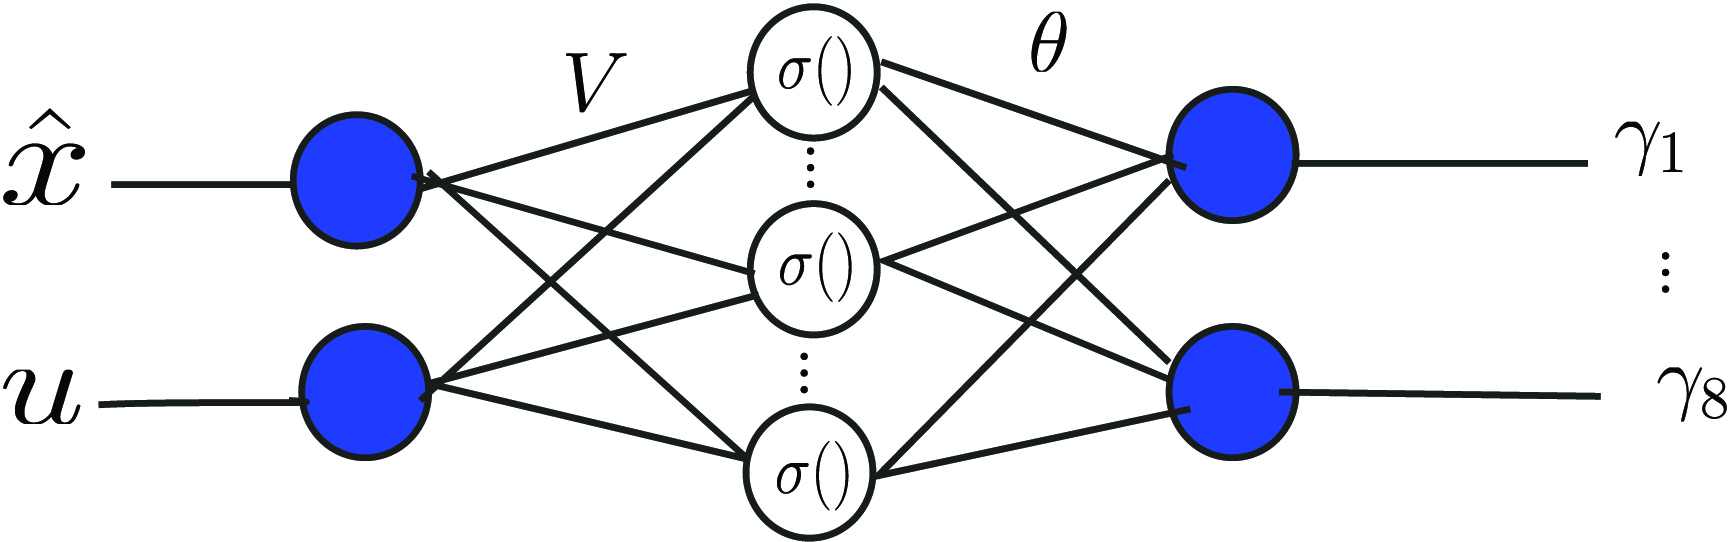 &lt;strong&gt;Figure 4.&lt;/strong&gt; Two-layer neural network that approximates the nonlinear fault function. Figure courtesy of [8].